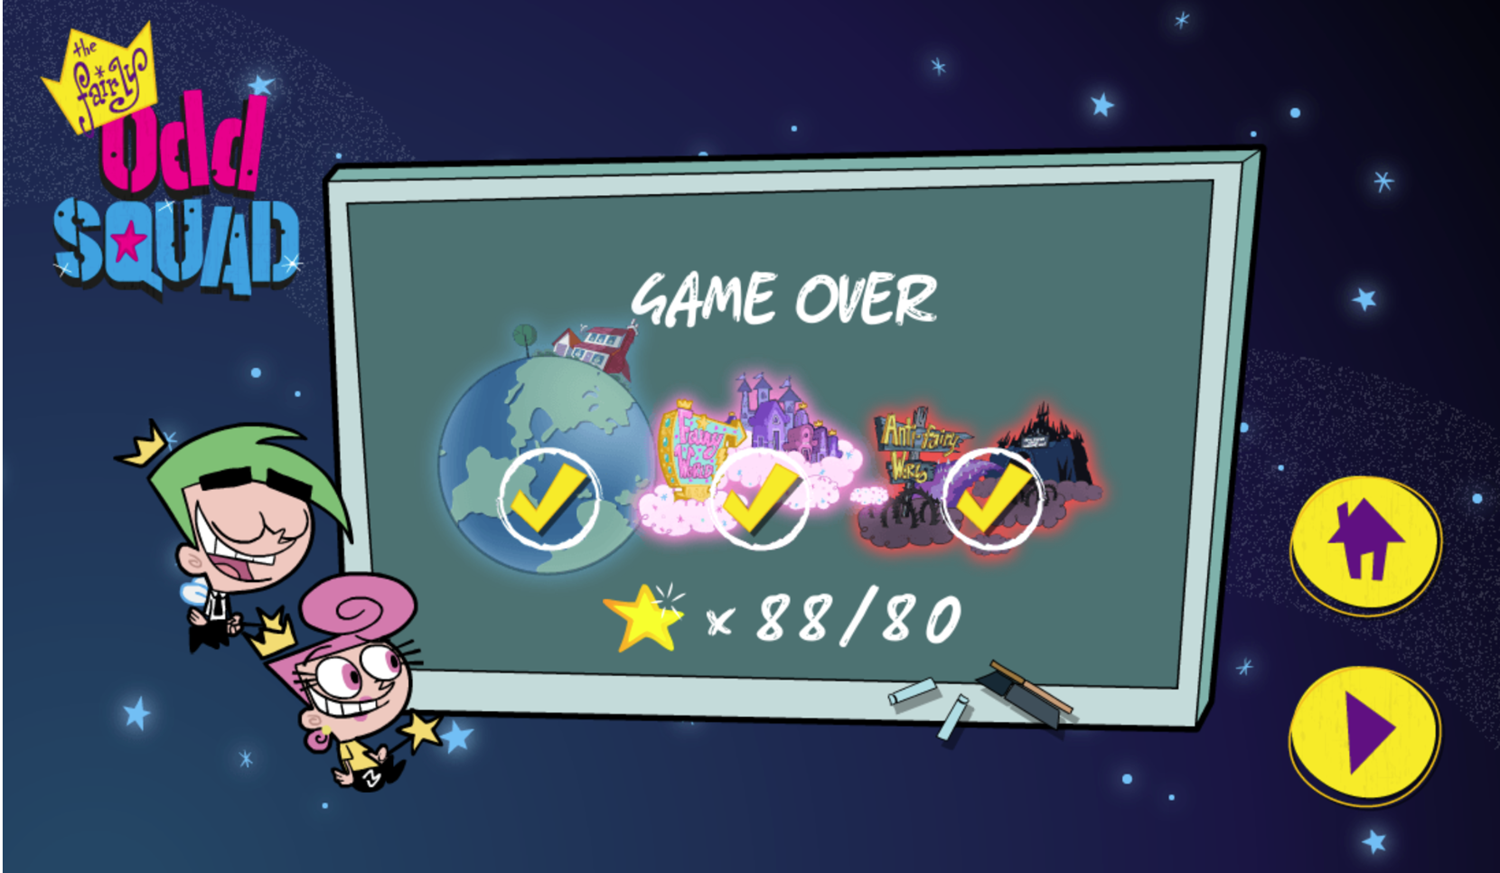 The Fairly OddParents The Fairly odd Squad Game Over Screen Screenshot.